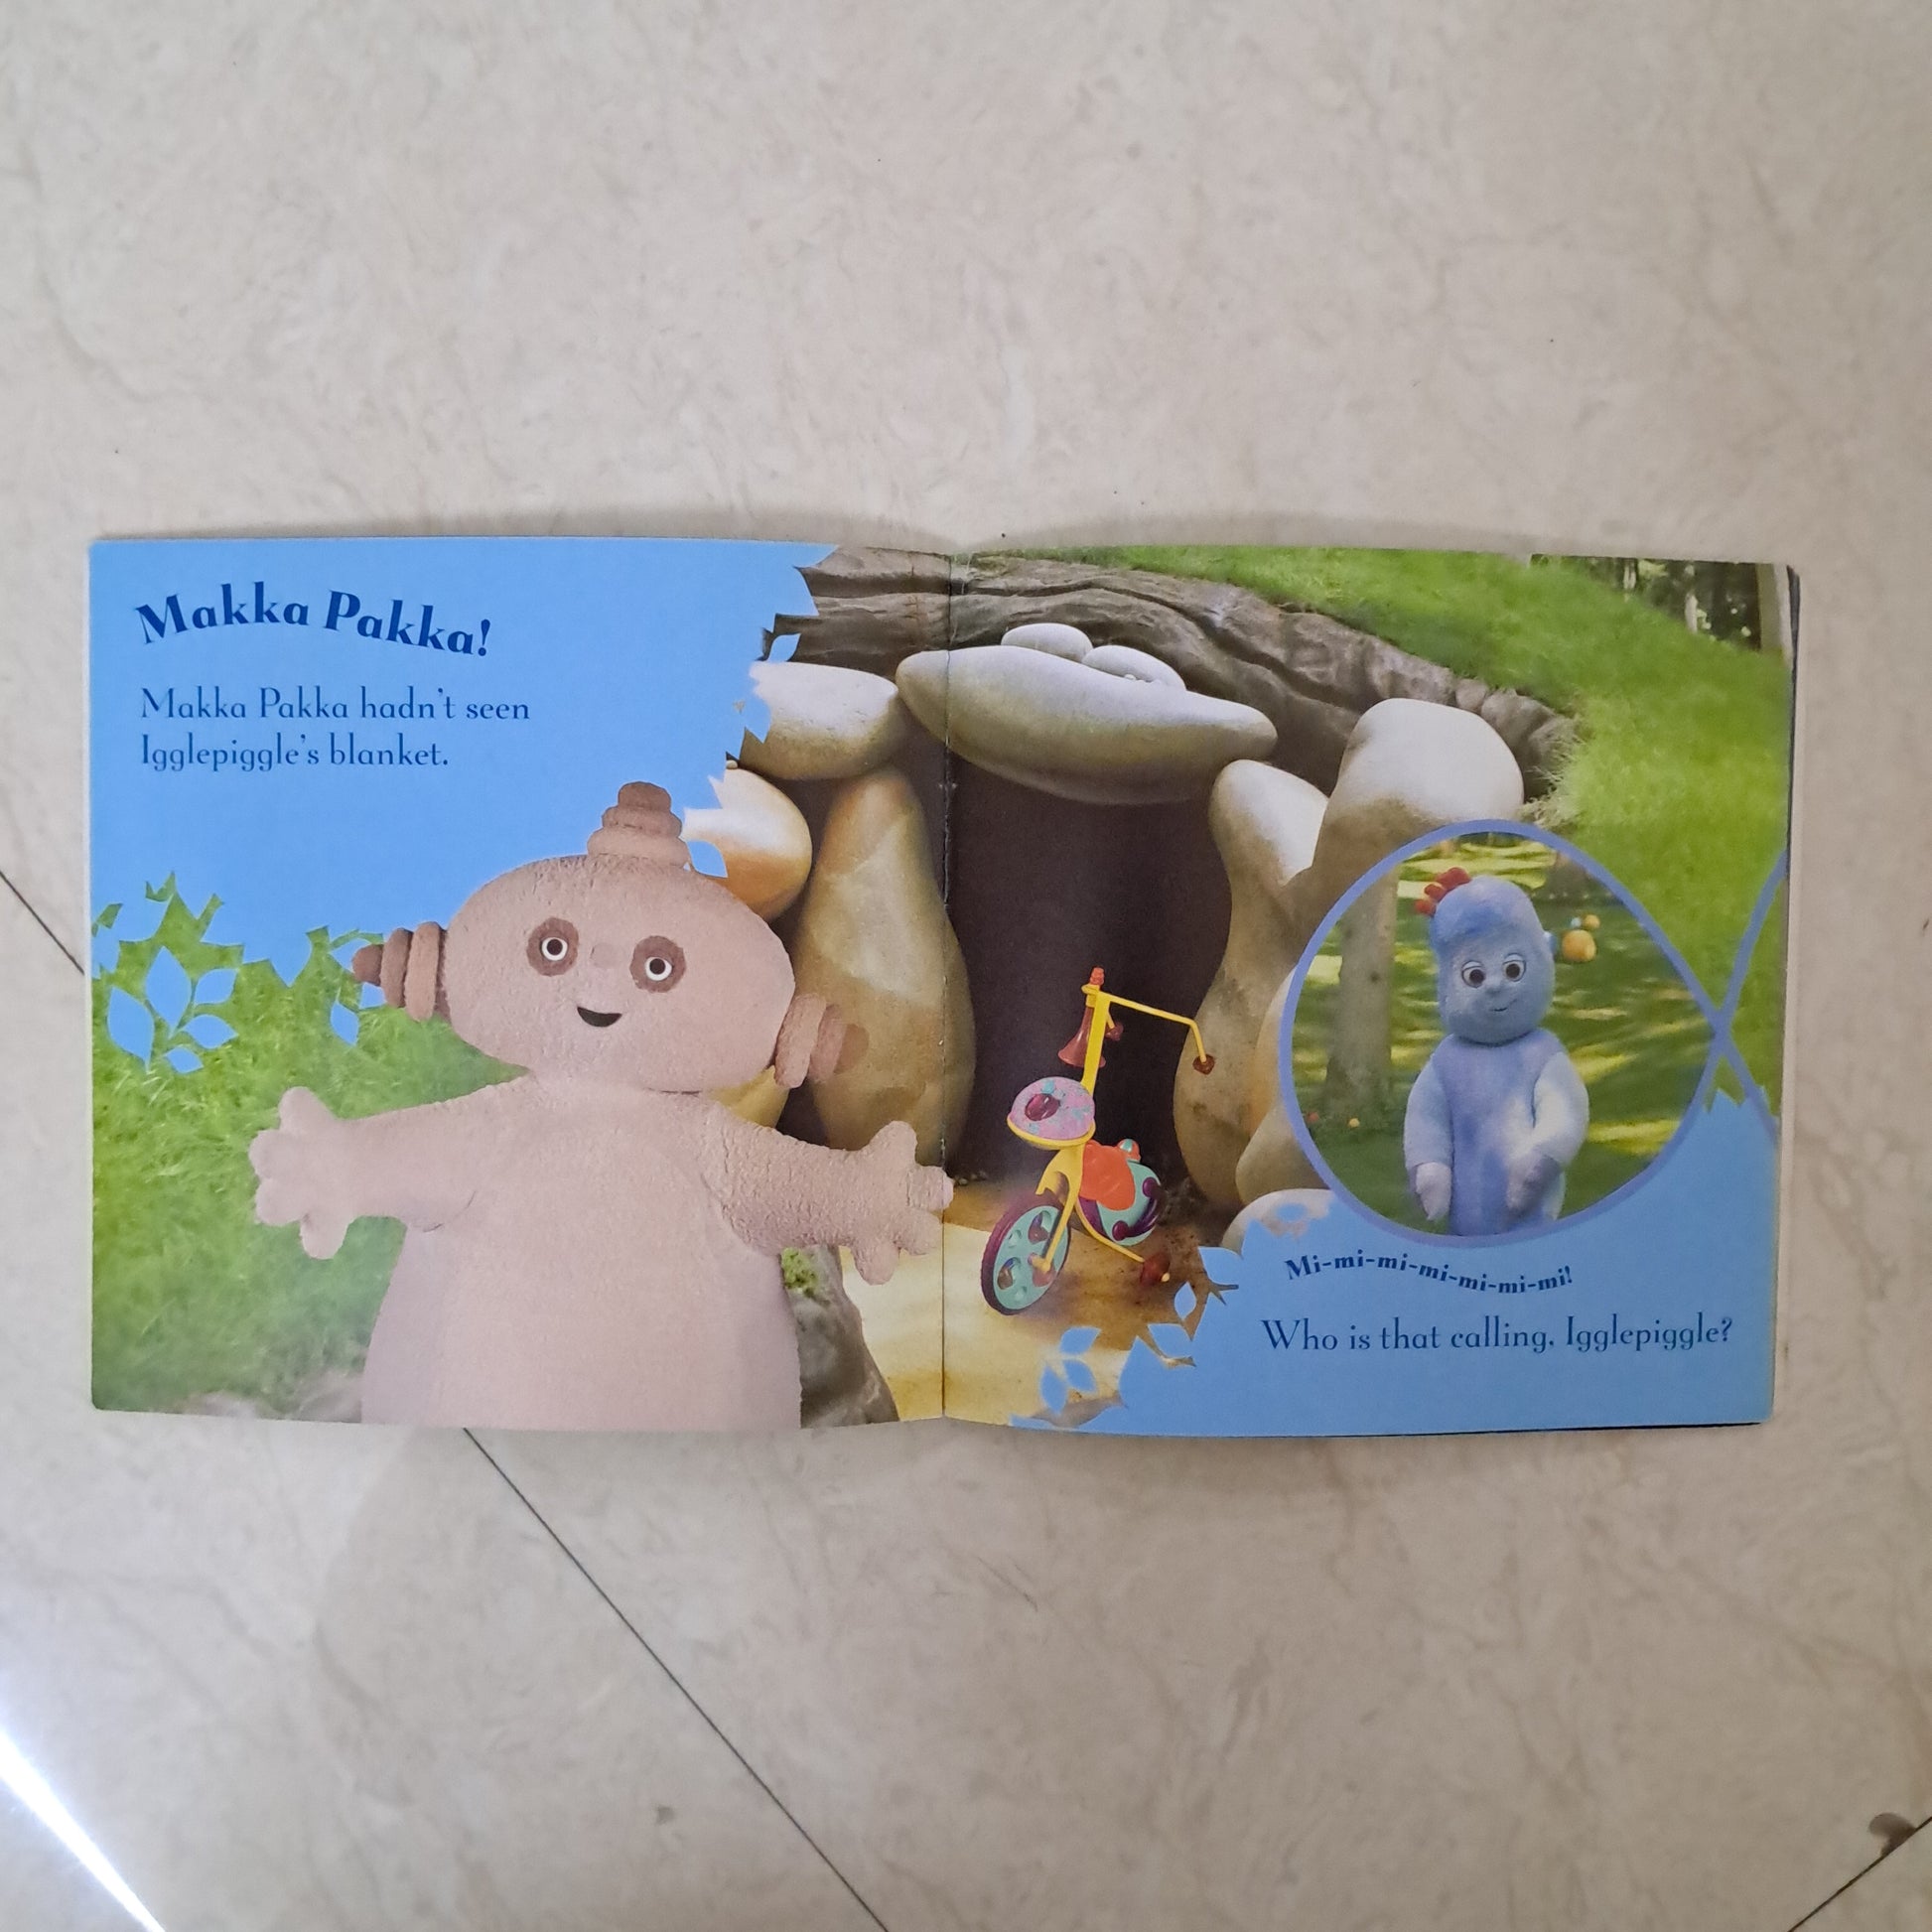 In The Night Garden: Hello, Makka Pakka! Press Out and Play